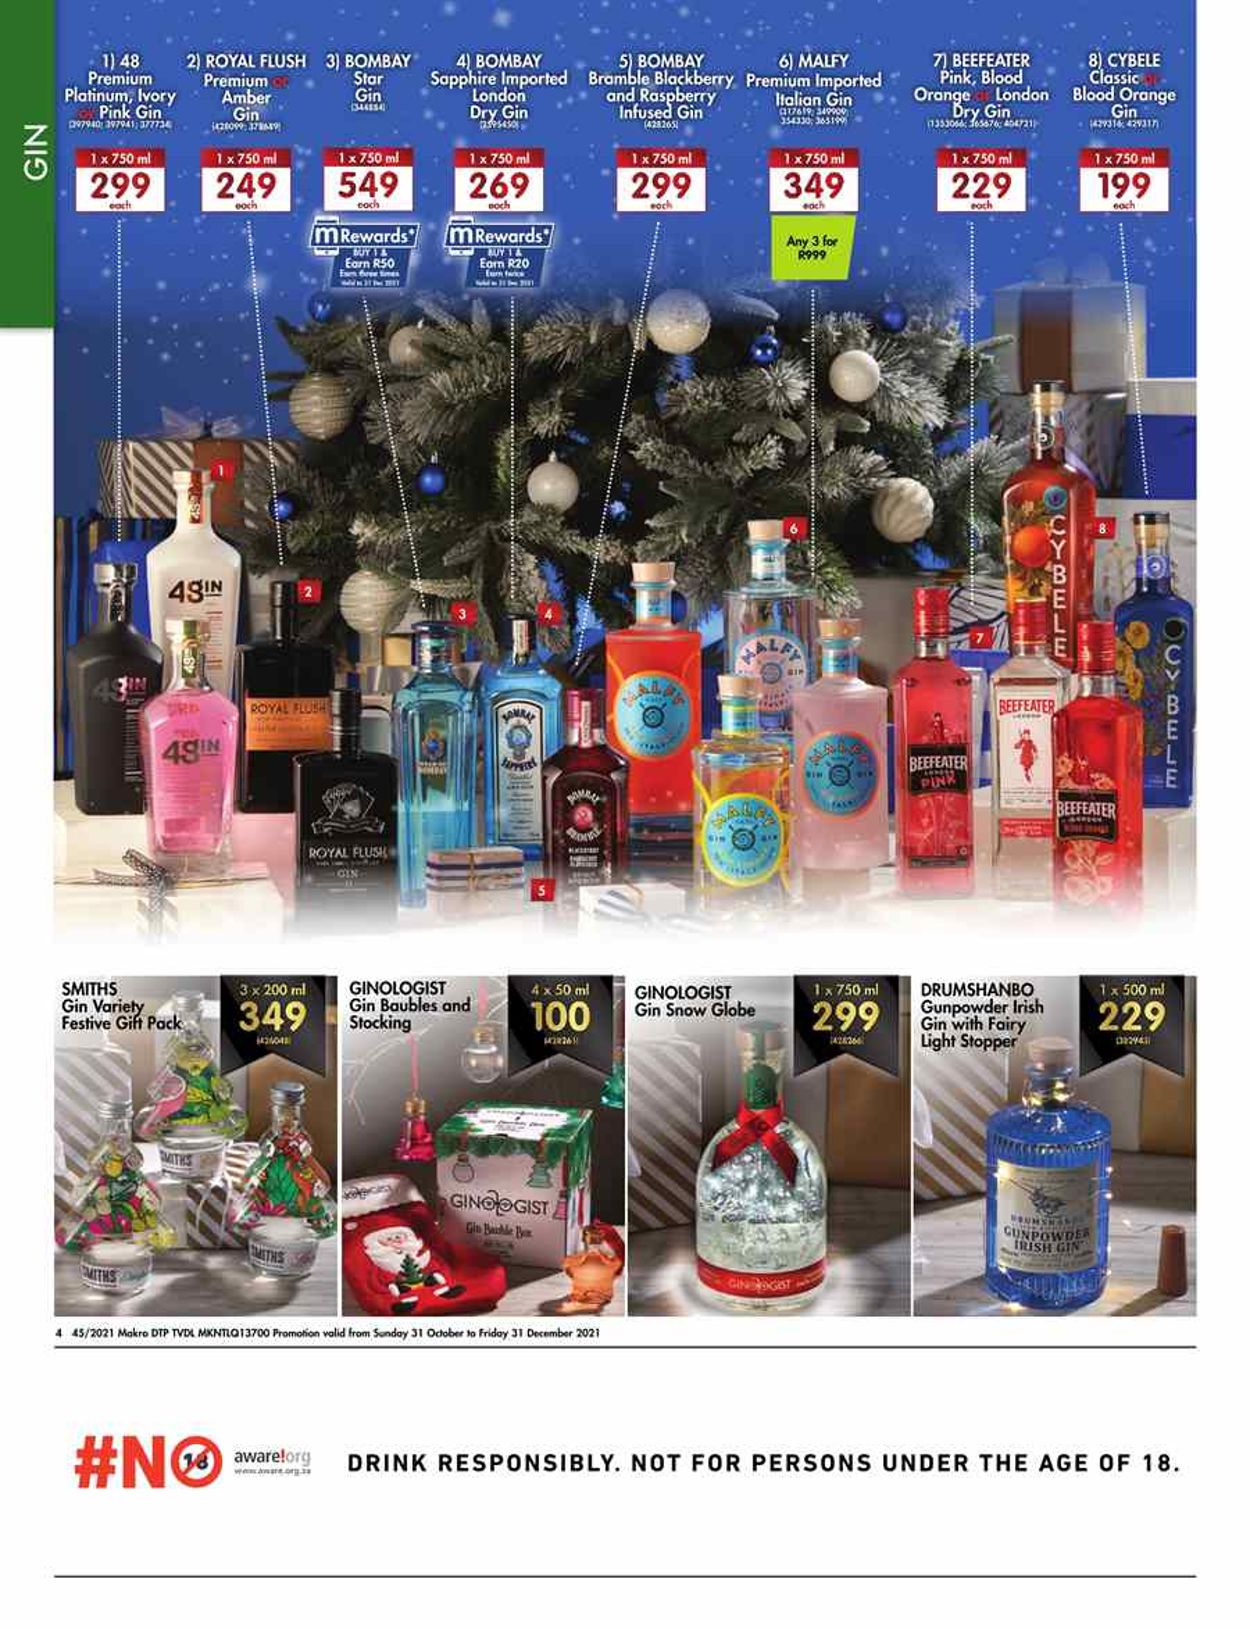 Makro Catalogue from 2021/10/31